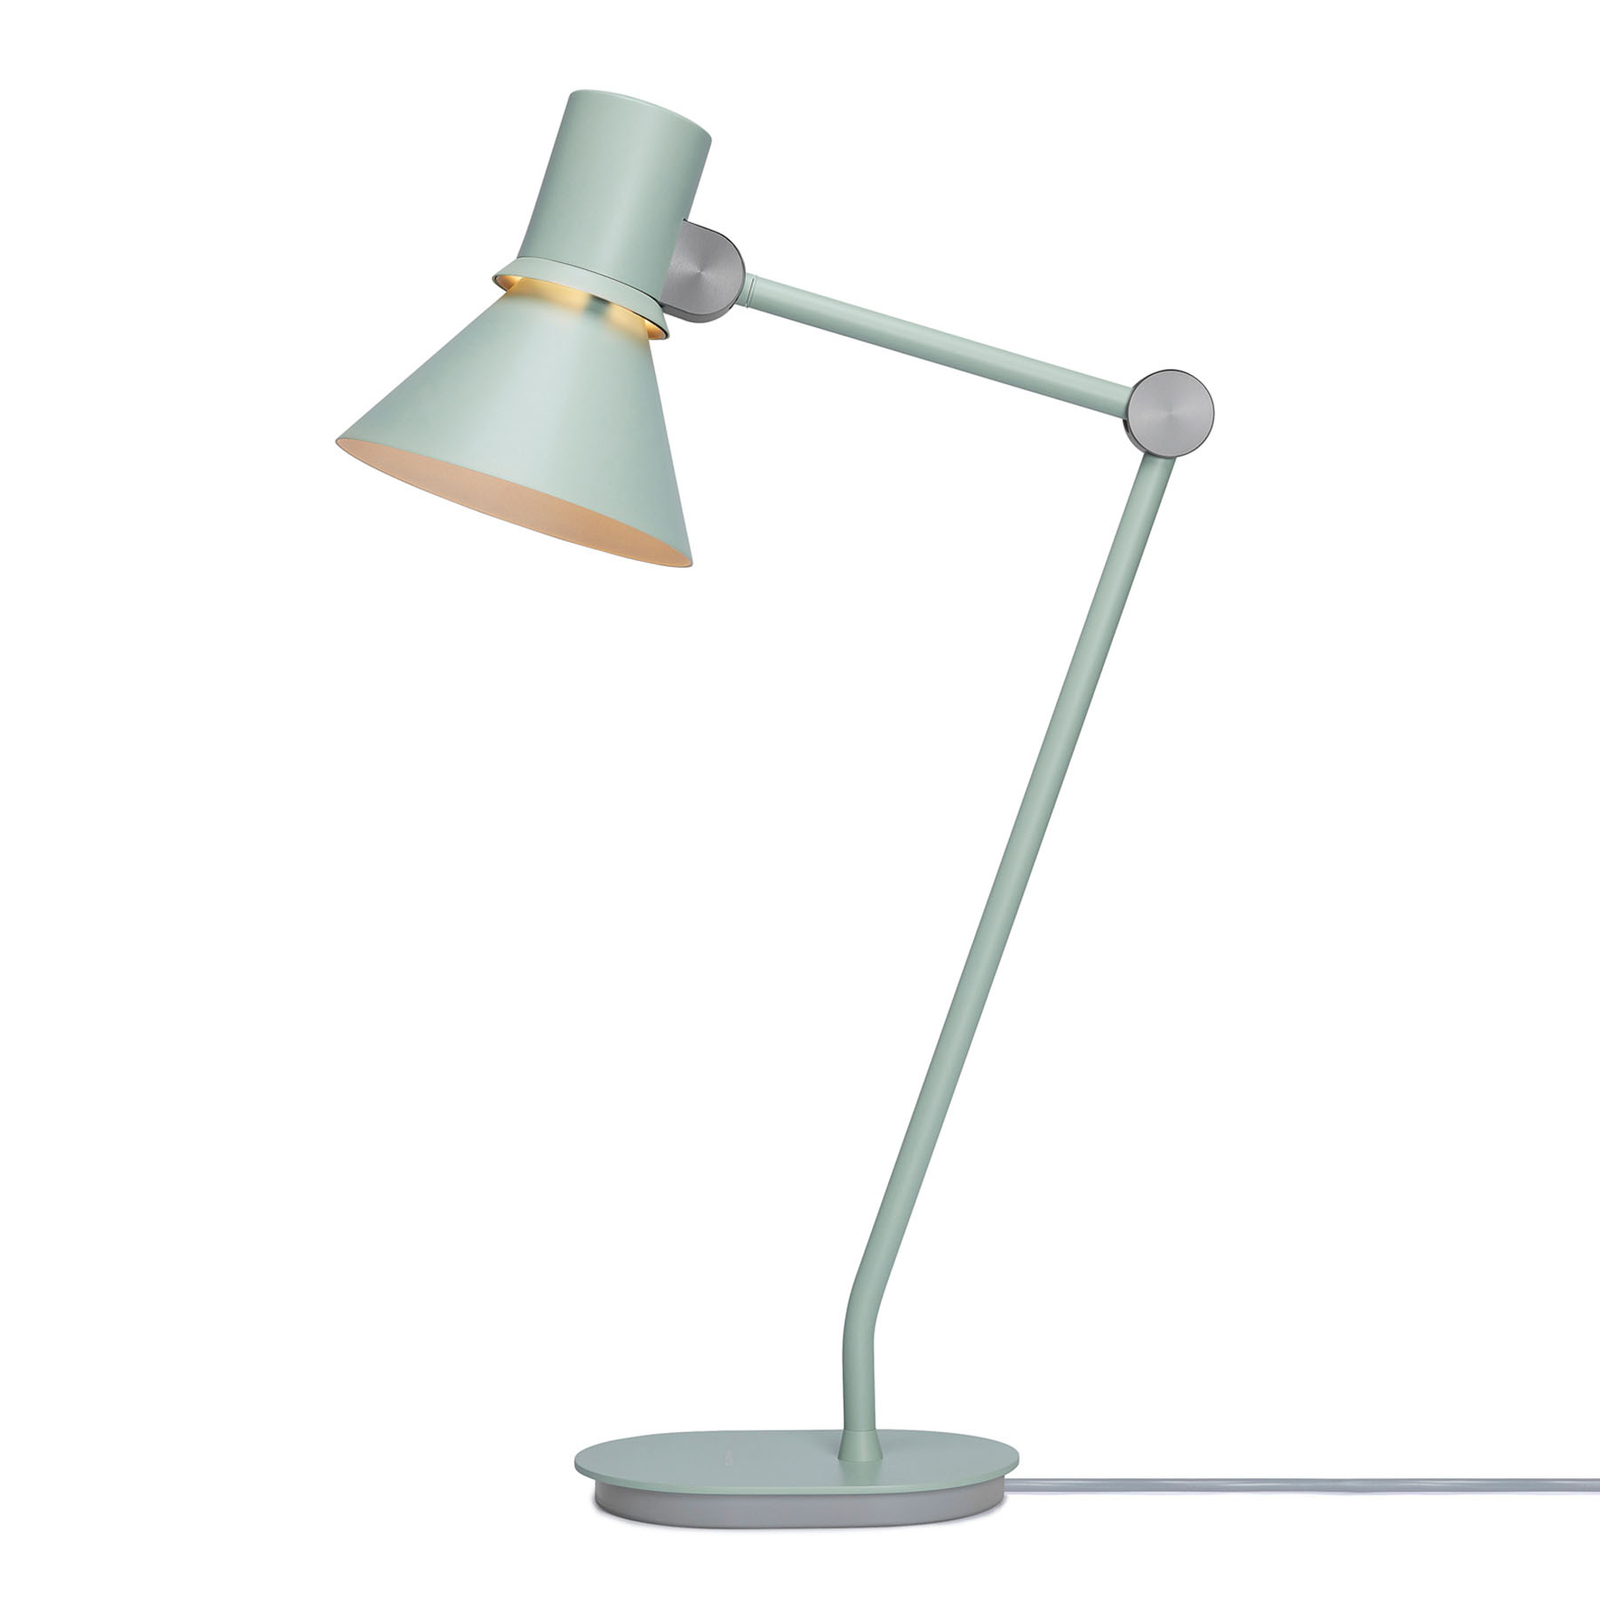 Anglepoise Type 80 table lamp, pistachio green